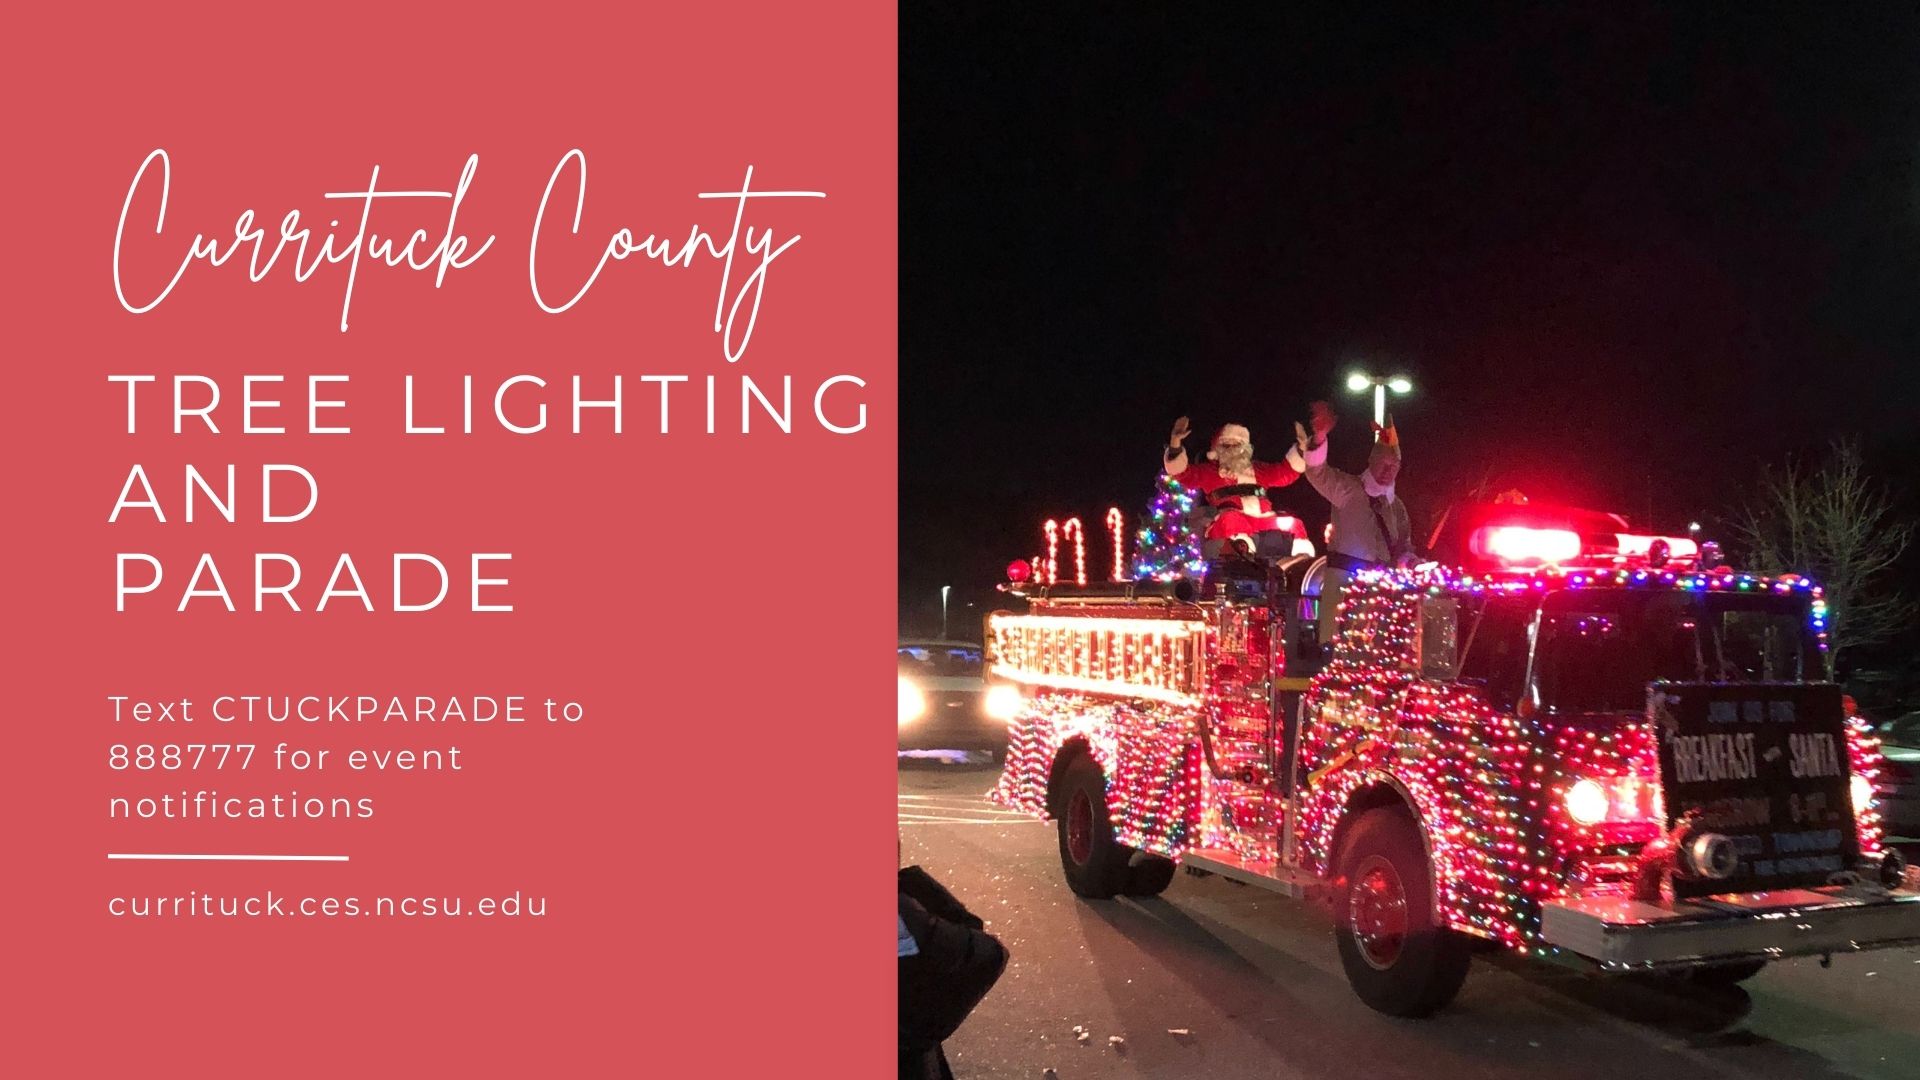 Currituck County Tree Lighting and Parade